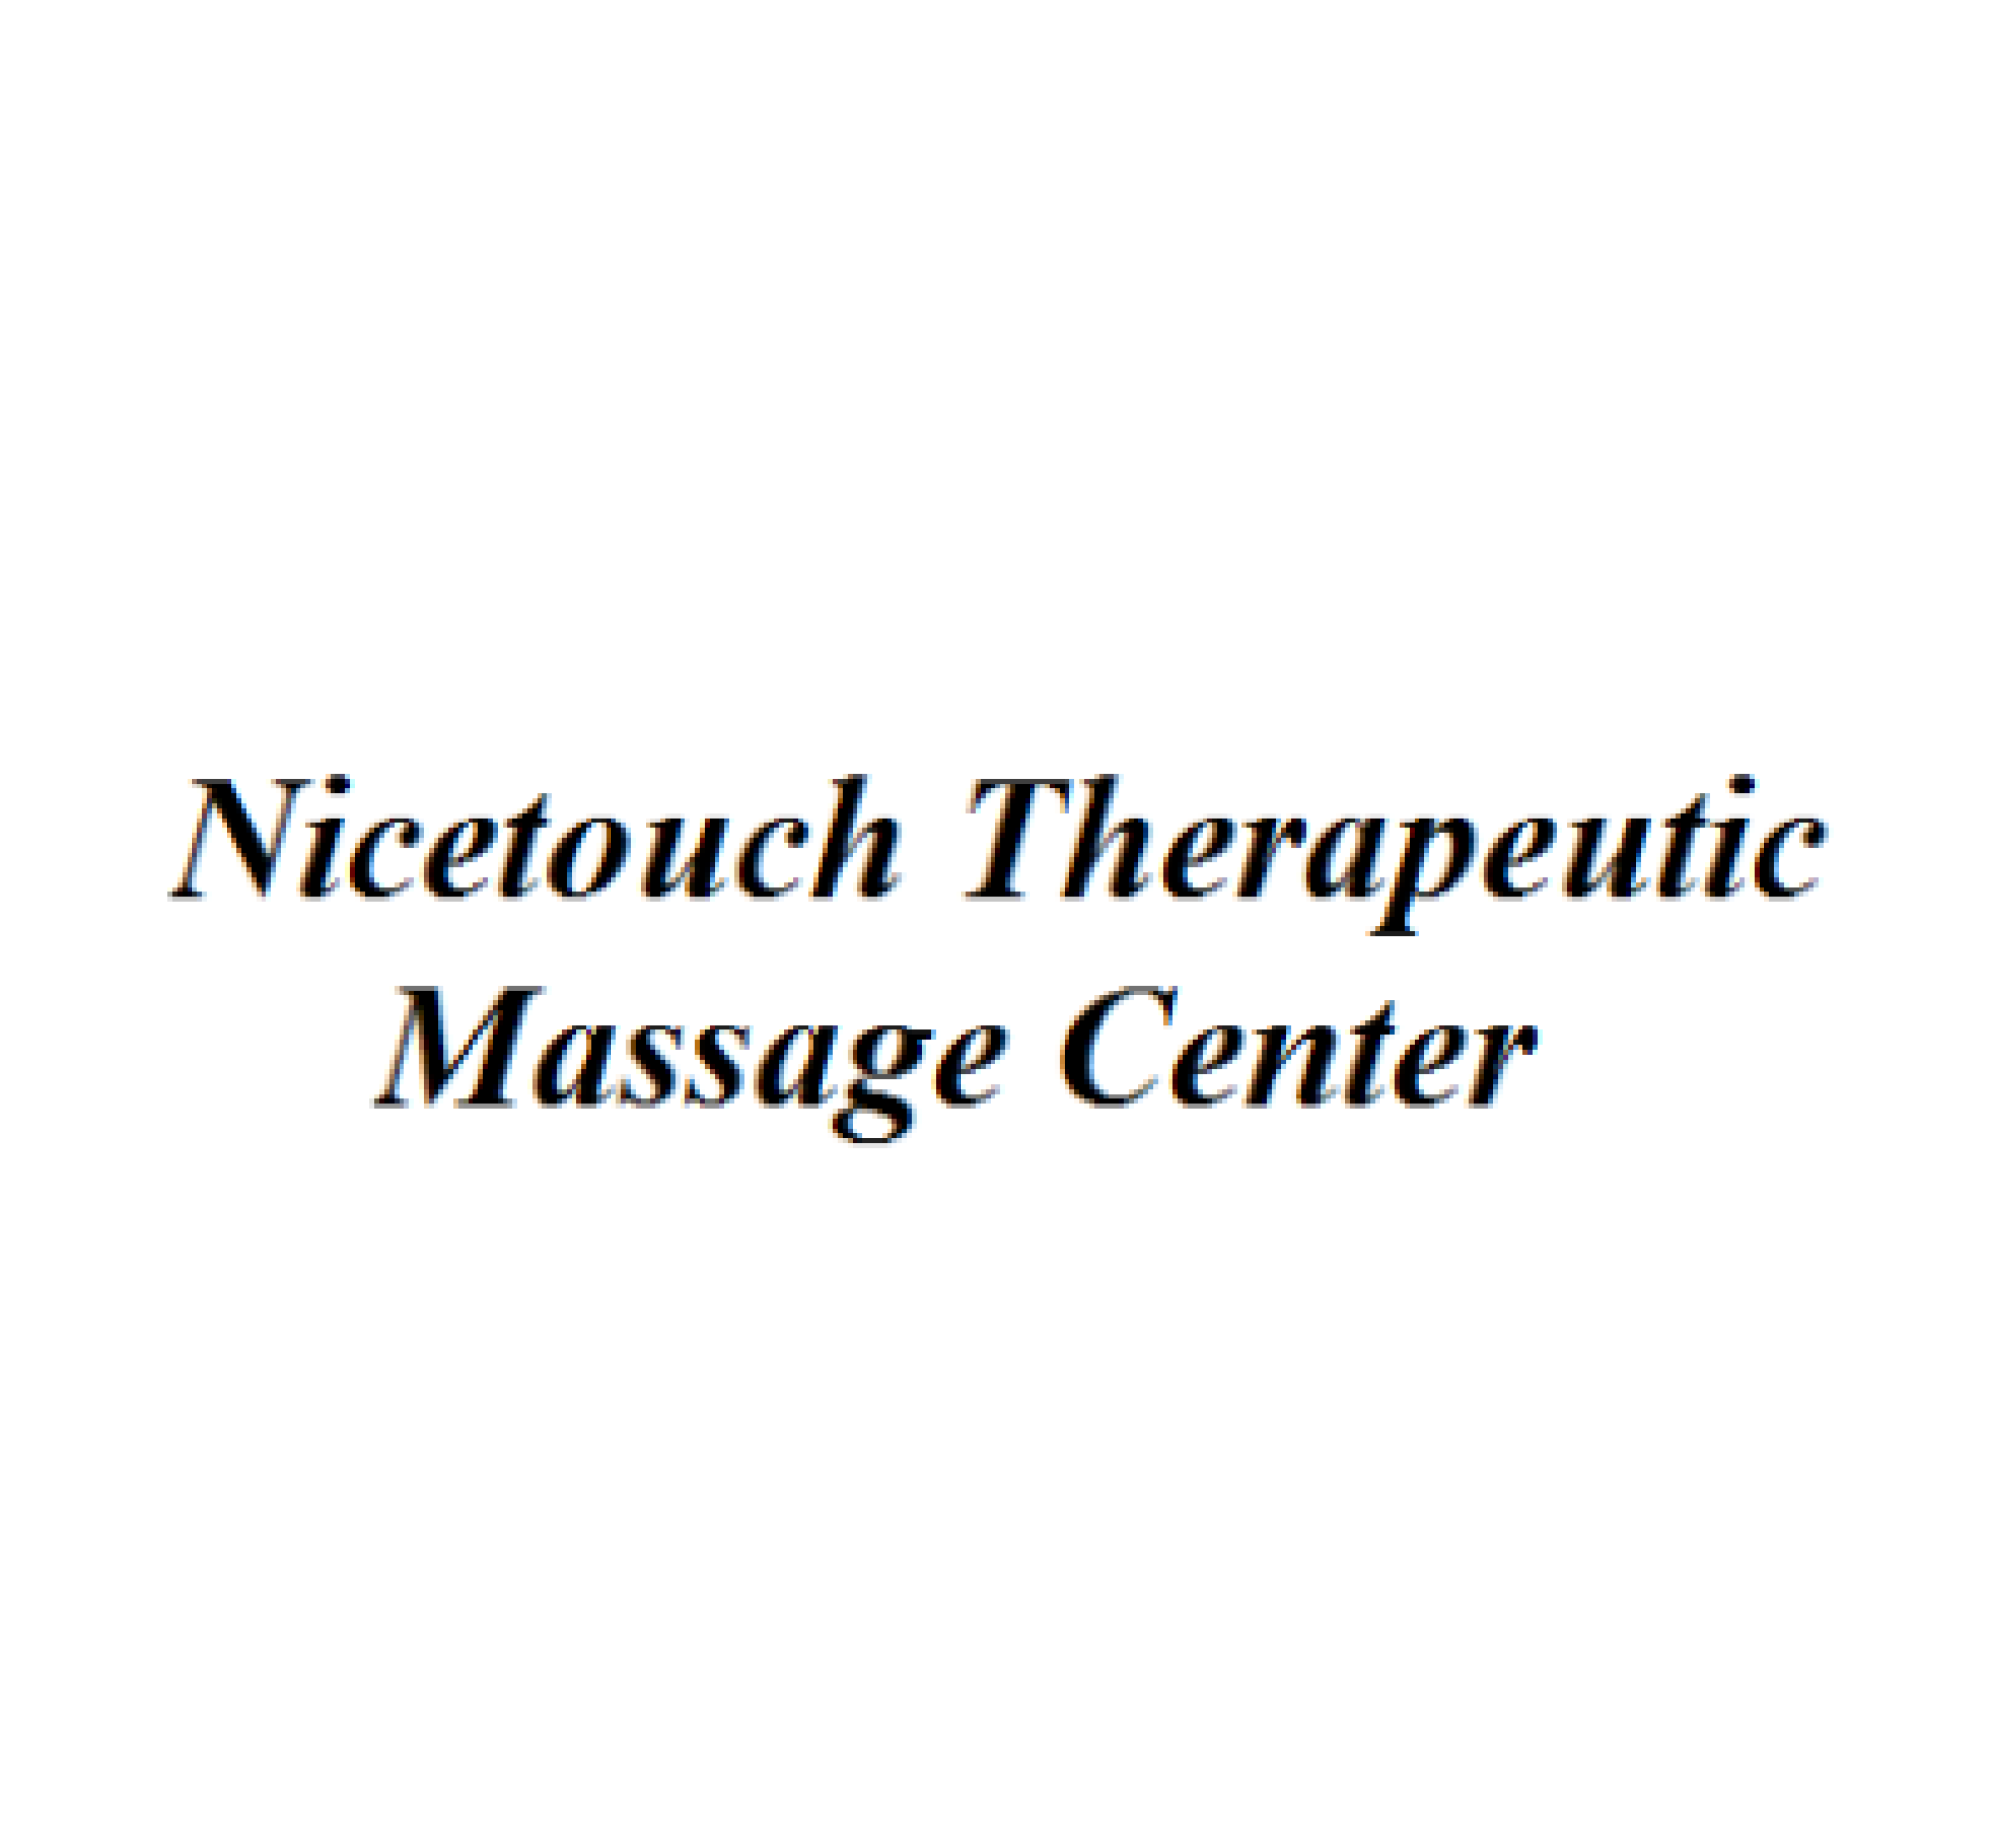 Nicetouch Therapeutic Massage Center